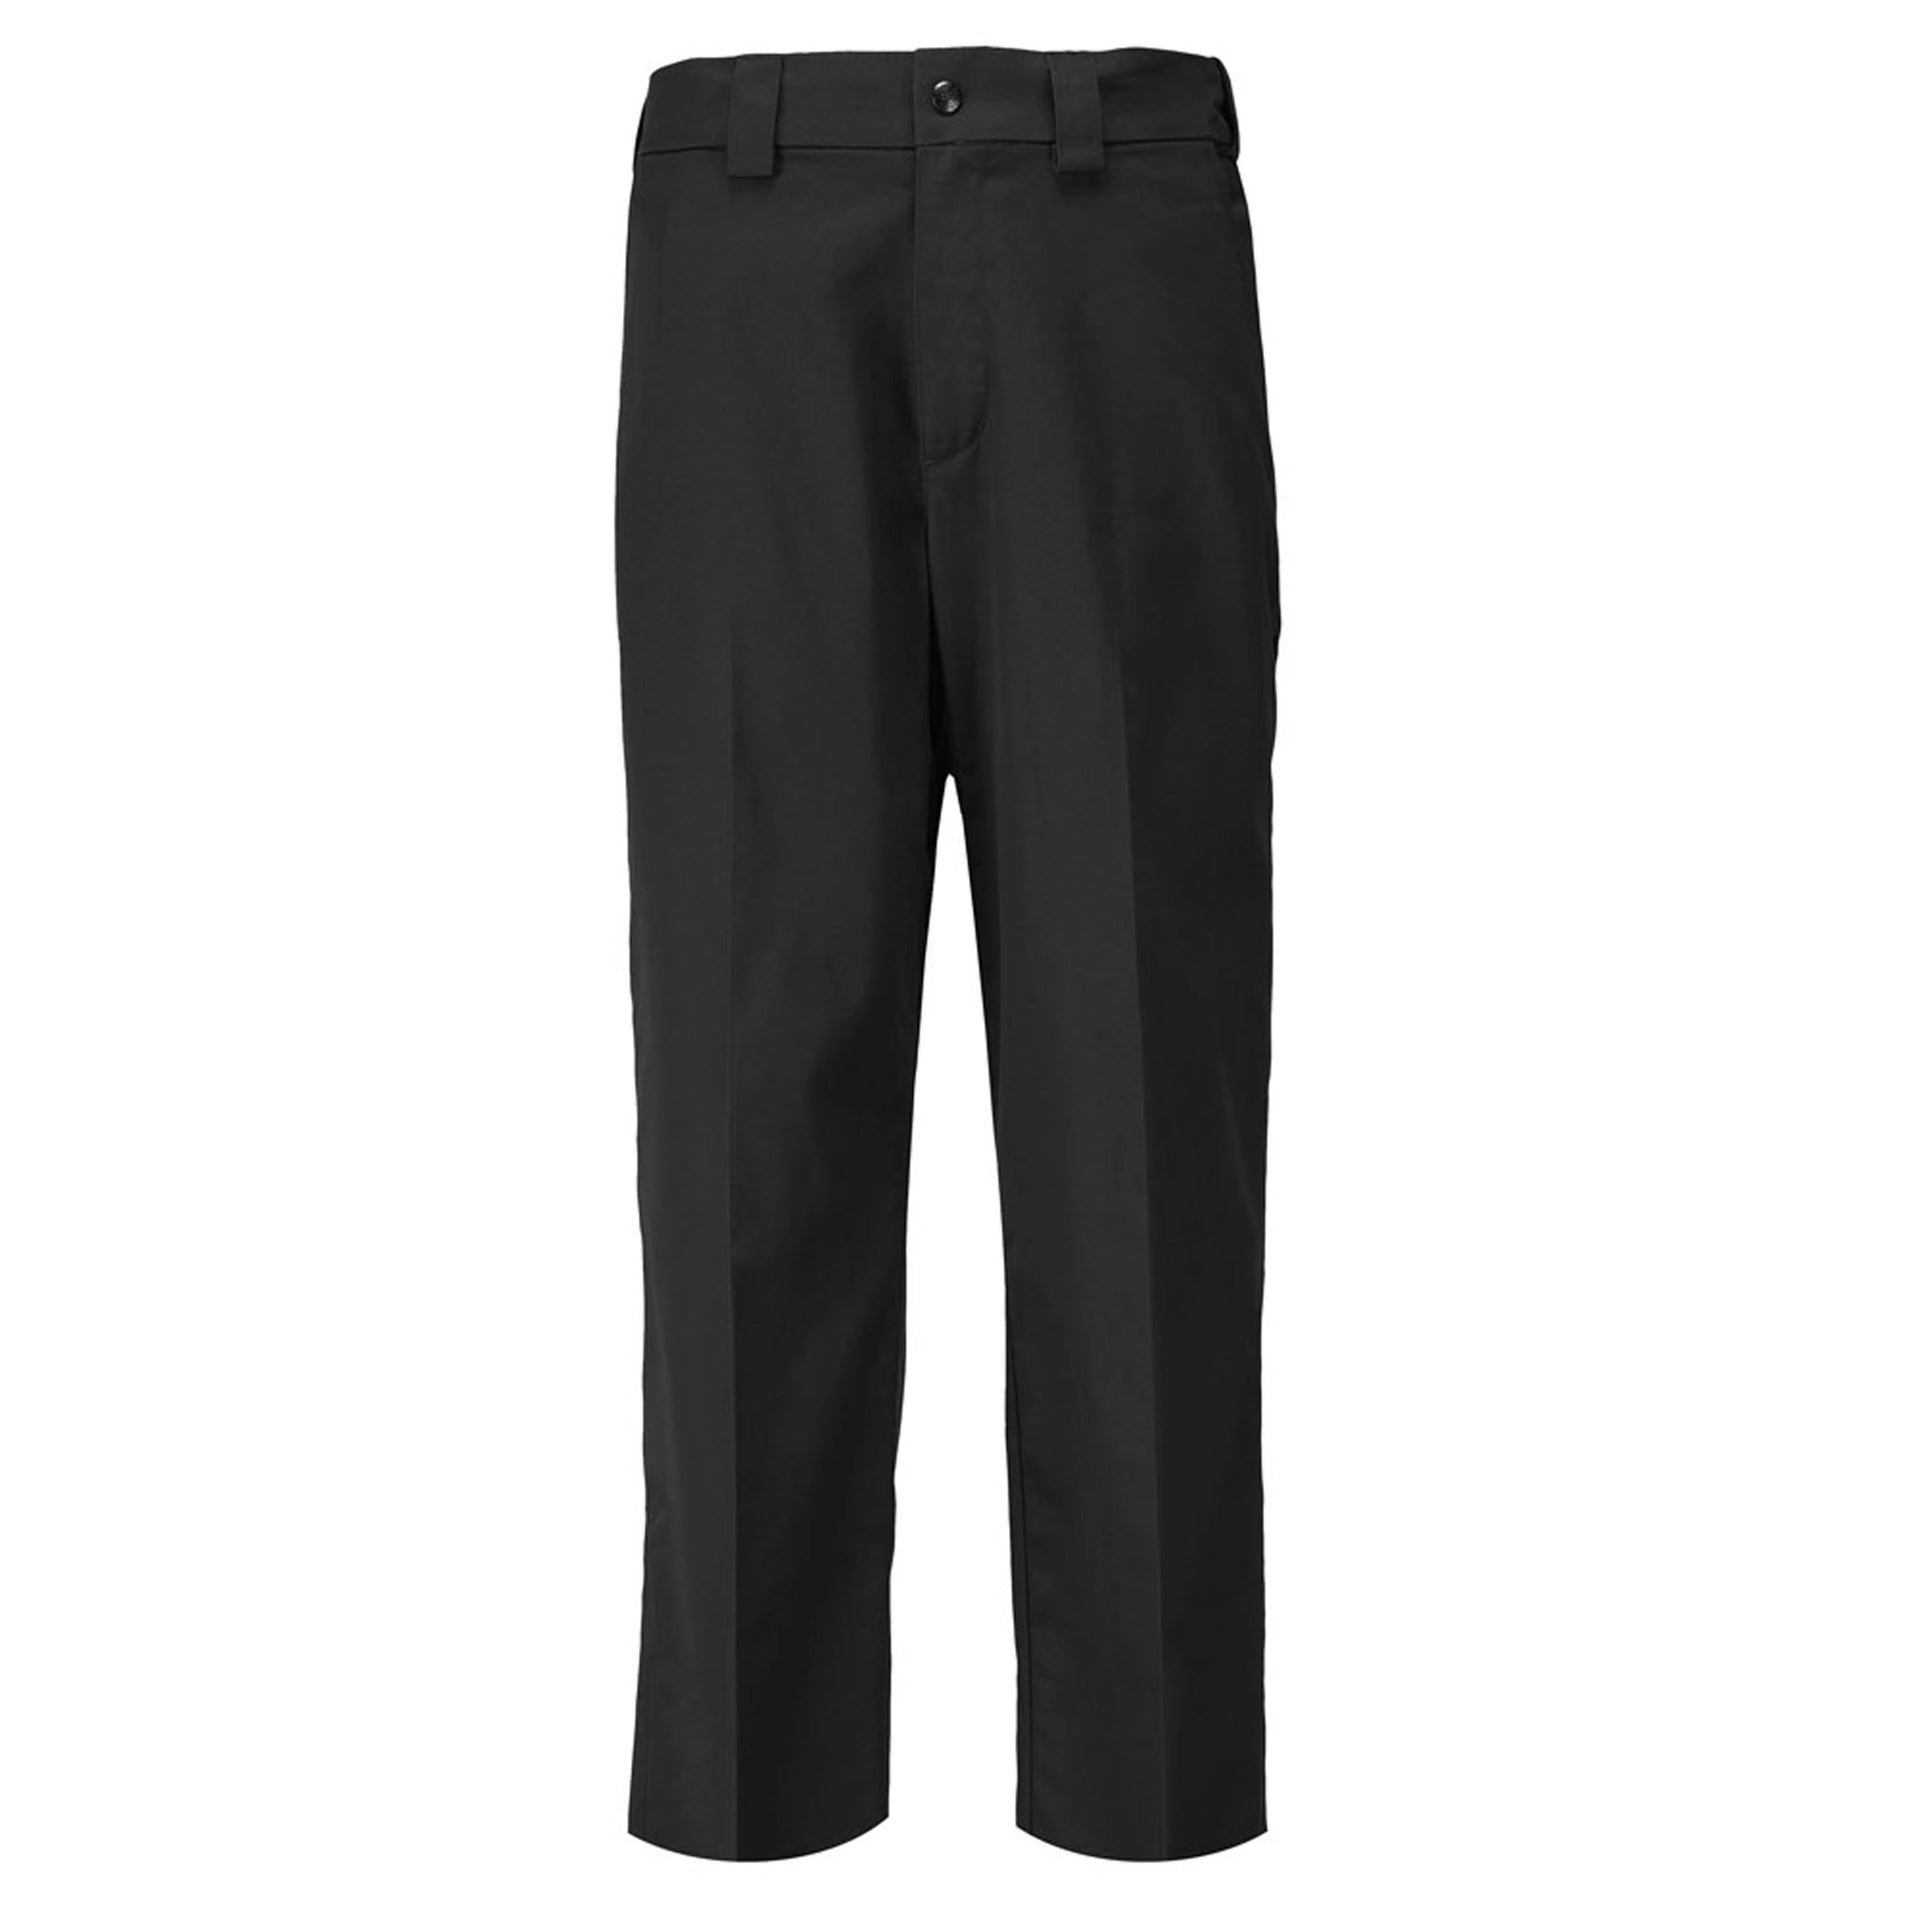 5.11 Tactical Men's PDU Class A Twill Pant (74338) | The Fire Center | The Fire Store | Elegant enough for your dress uniform but functional enough for duty wear, the PDU® Class A Twill Pant offers superior craftsmanship and a clean, neat appearance that keeps you looking your best throughout your shift.